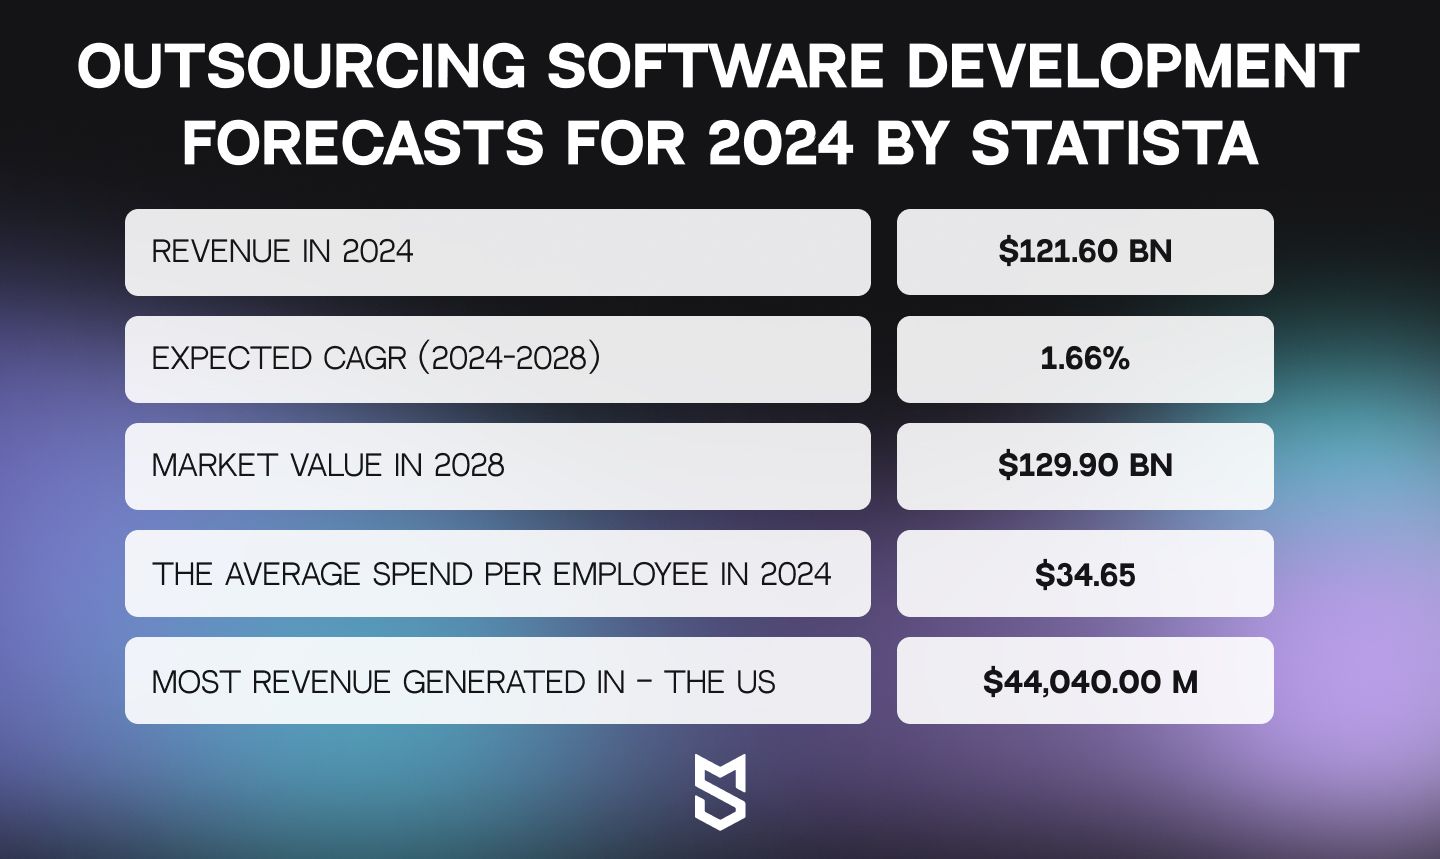 Outsourcing software development forecasts for 2024 by Statista